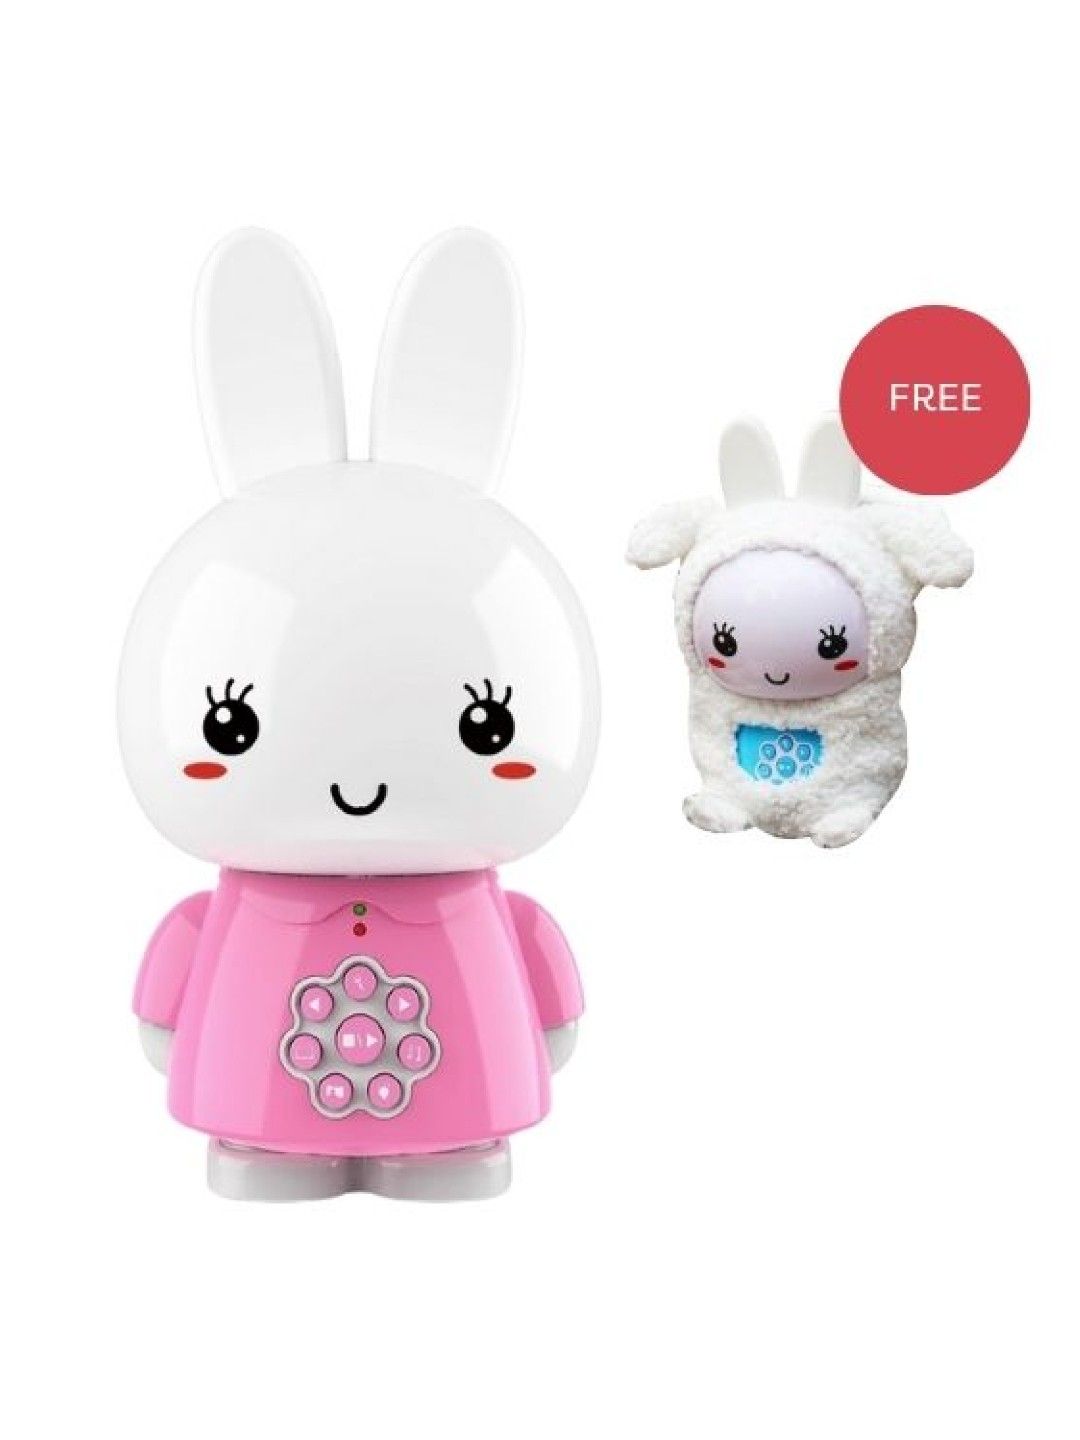 Alilo Classic Honey Bunny (Pink) w/ Free CarryMe White Costume